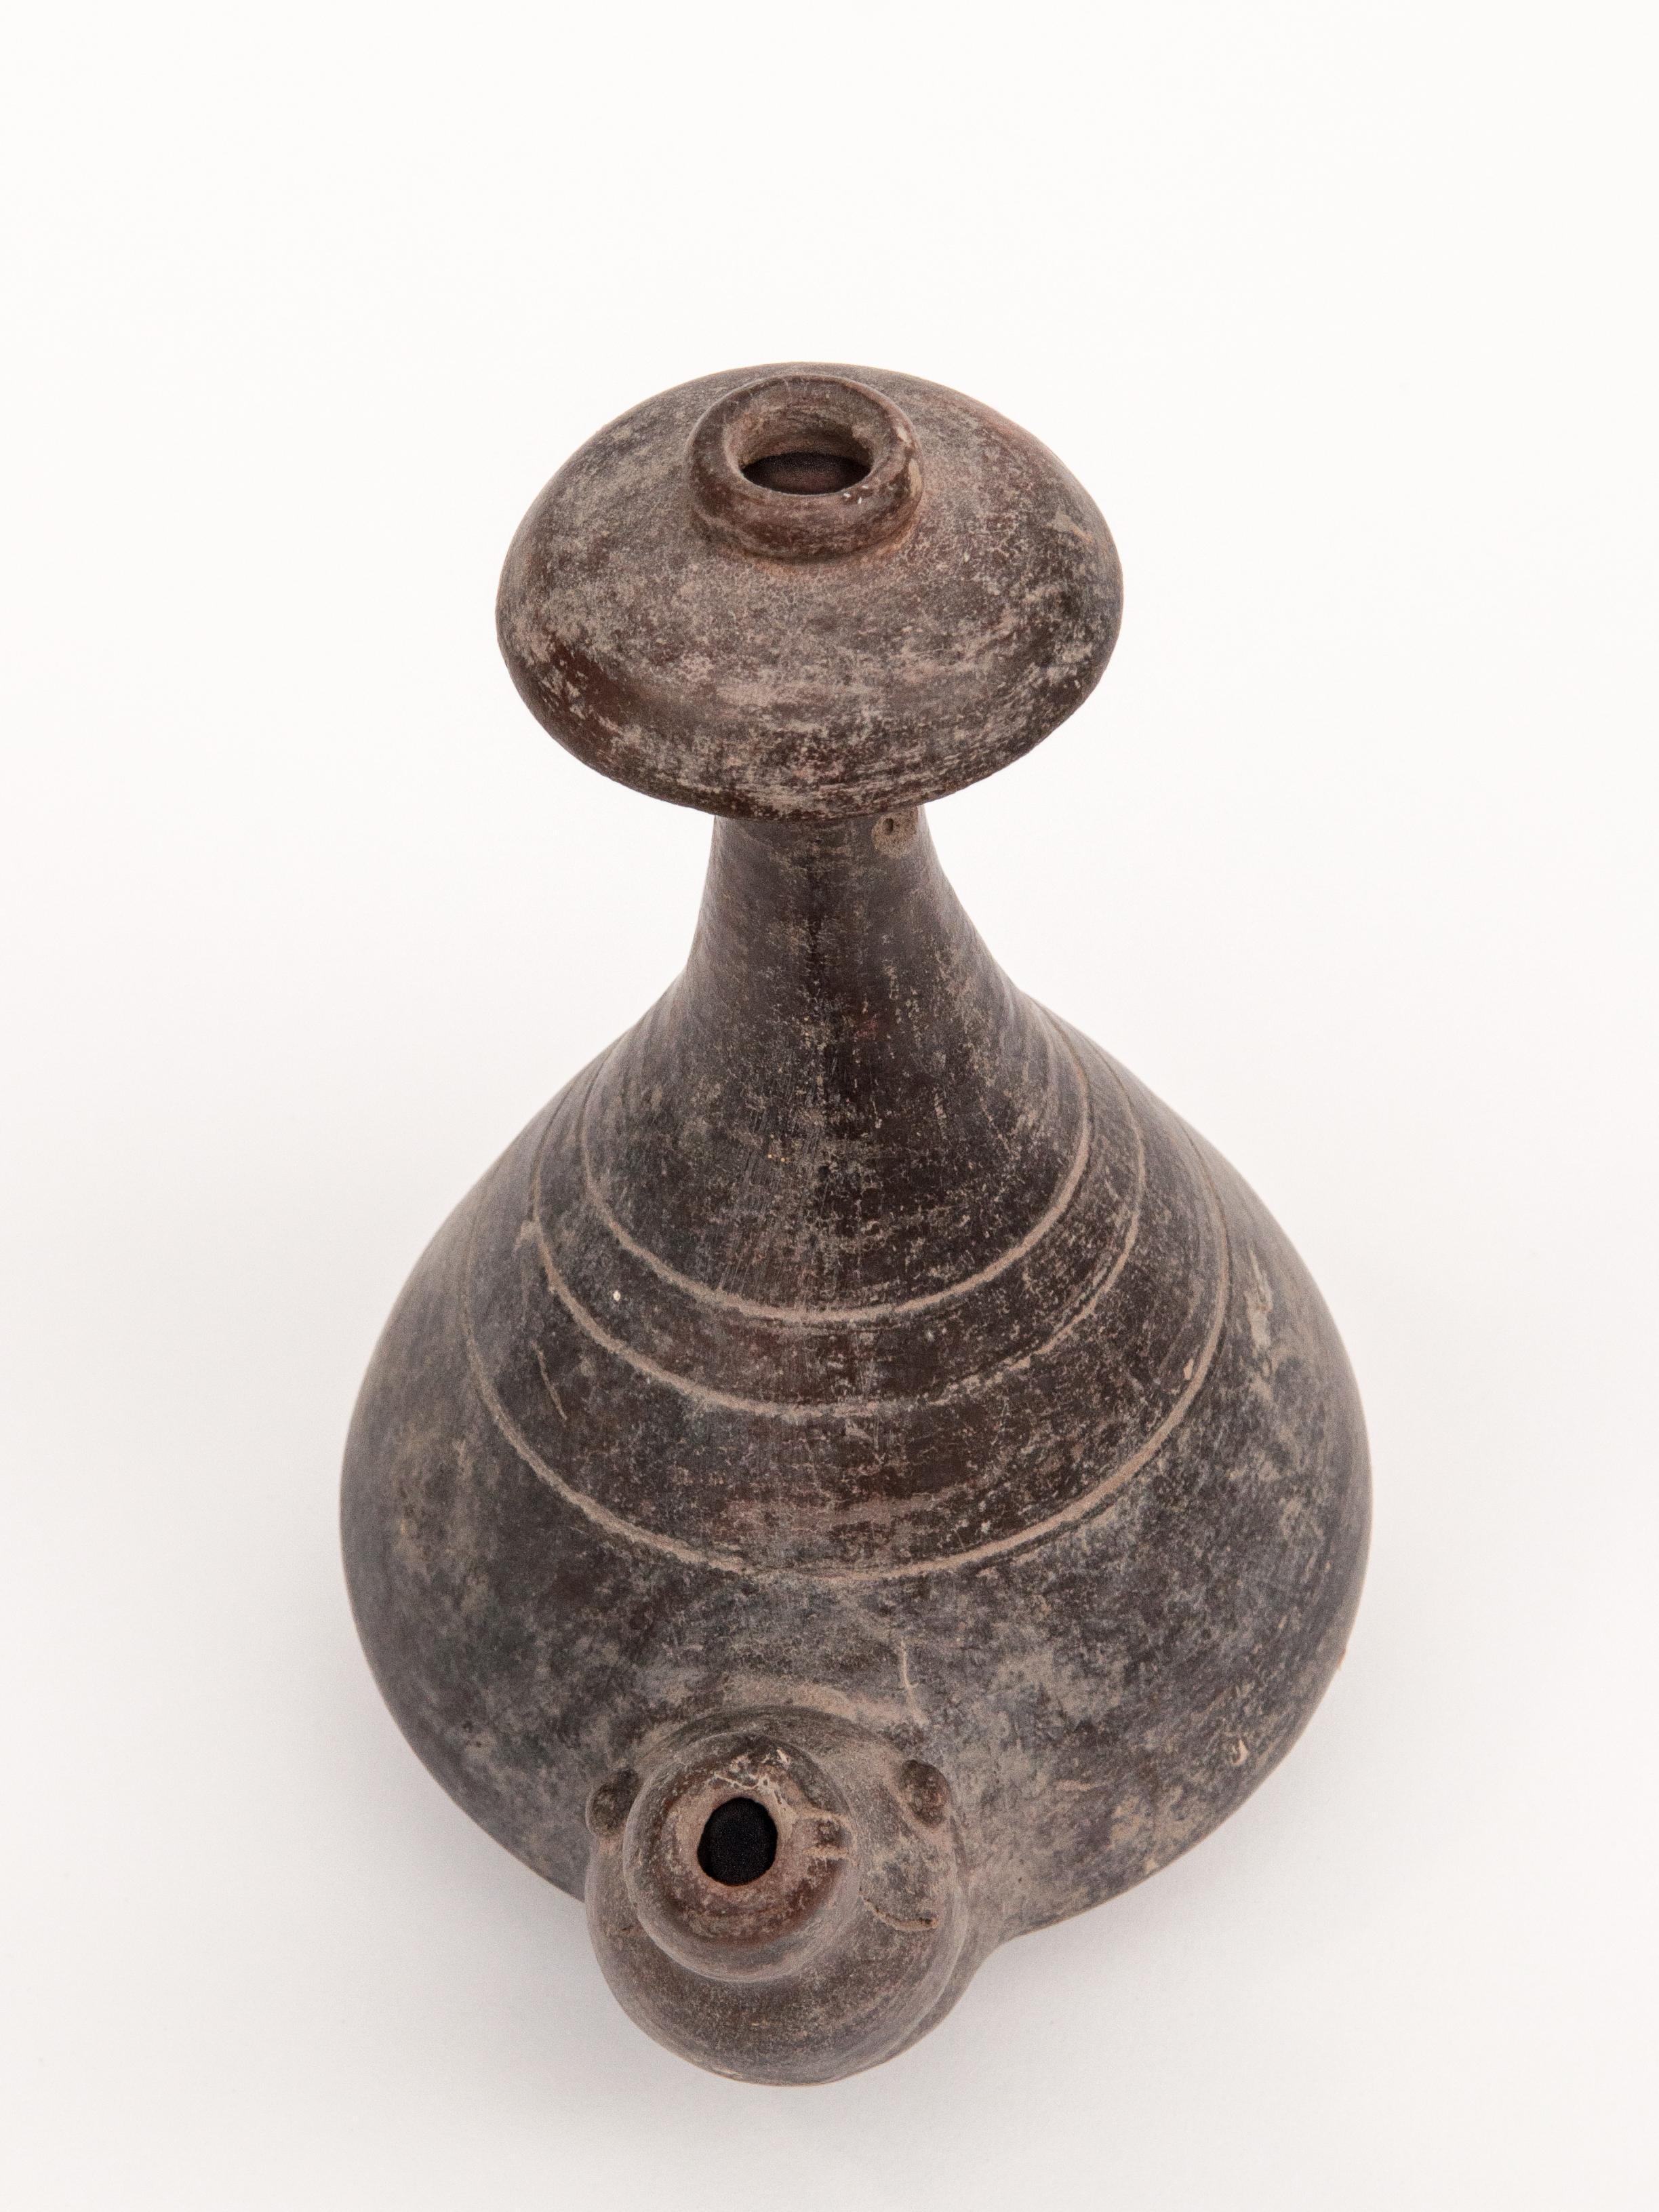 Indonesian Old Earthenware Kendi, Majapahit Style, North or East Java, Late 19th Century